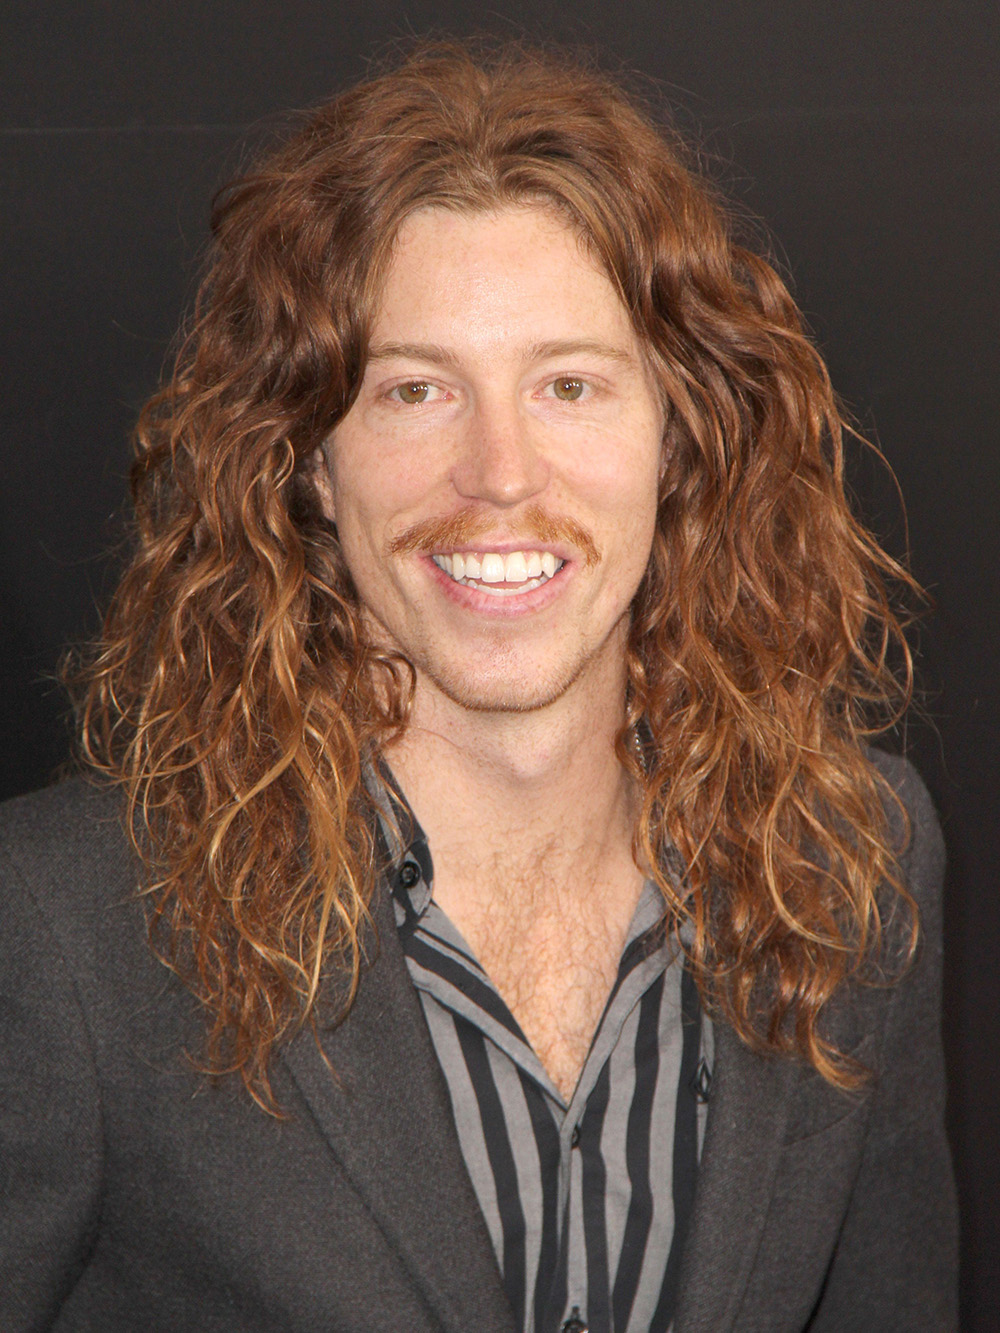 What Does He Look Like Now?  Shaun white, Mens hairstyles, Shawn white